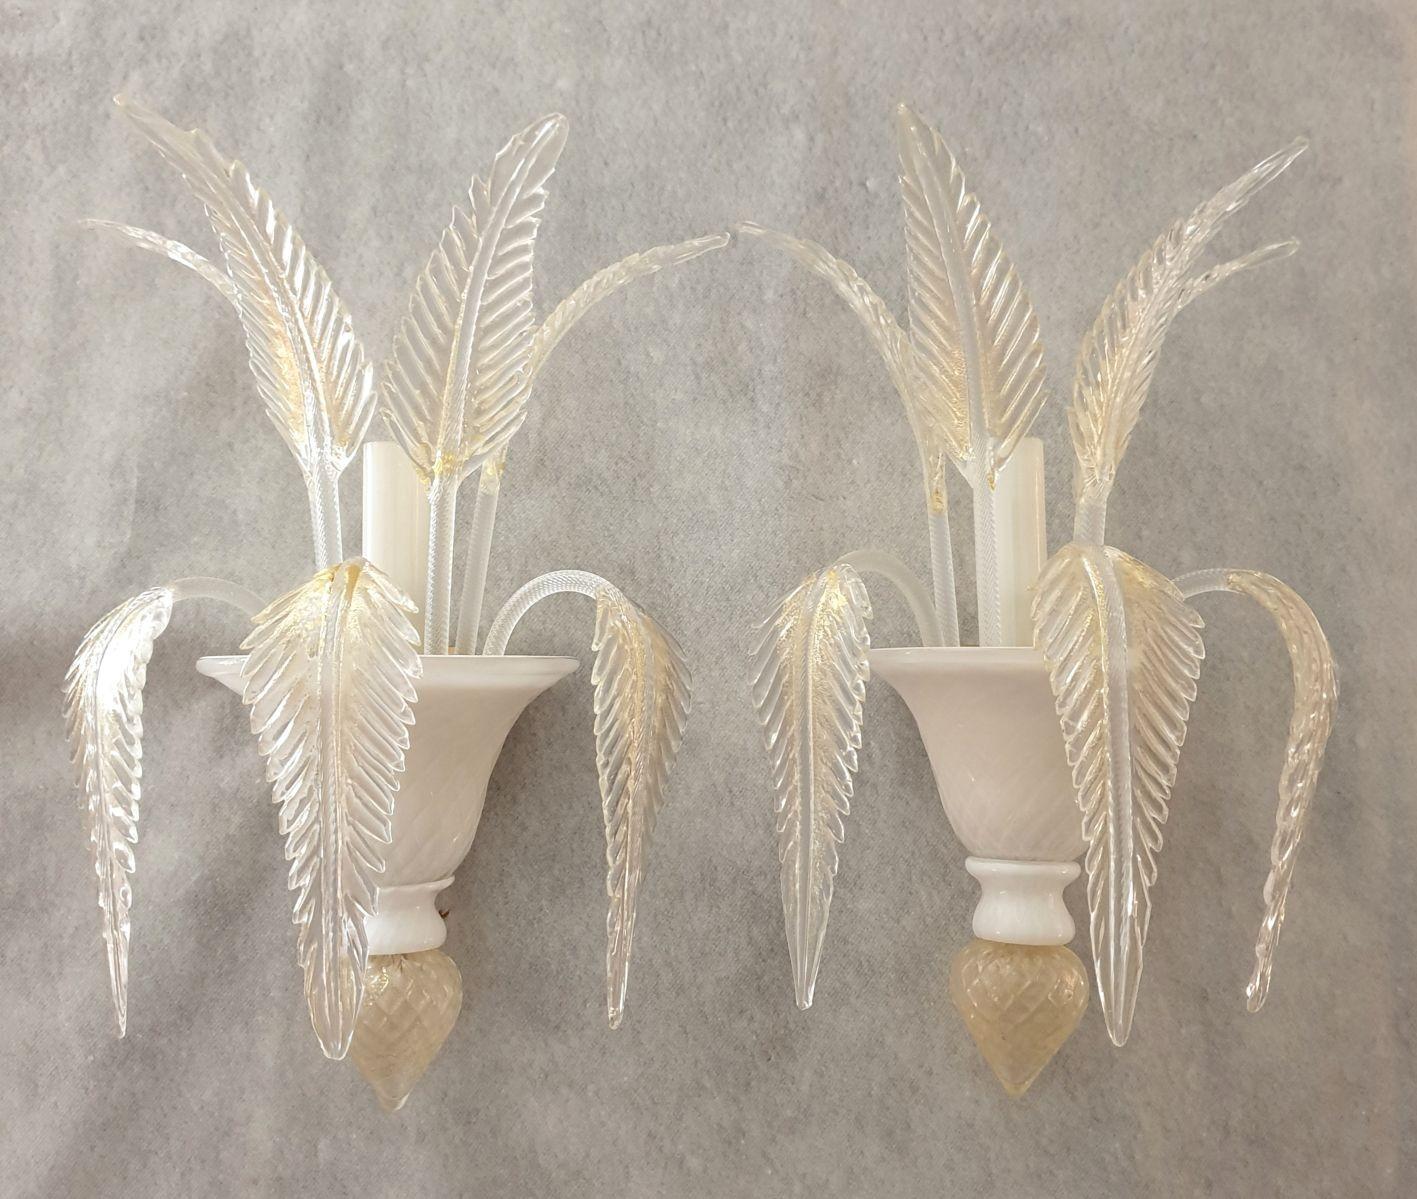 Pair of Neoclassical style Murano glass wall sconces, attributed to Venini, Italy 1970s.
The Mid Century sconces are made of hand blown Murano glass.
They have a milk white bottom vase and six delicate clear and gold leaves.
A glass white tube is